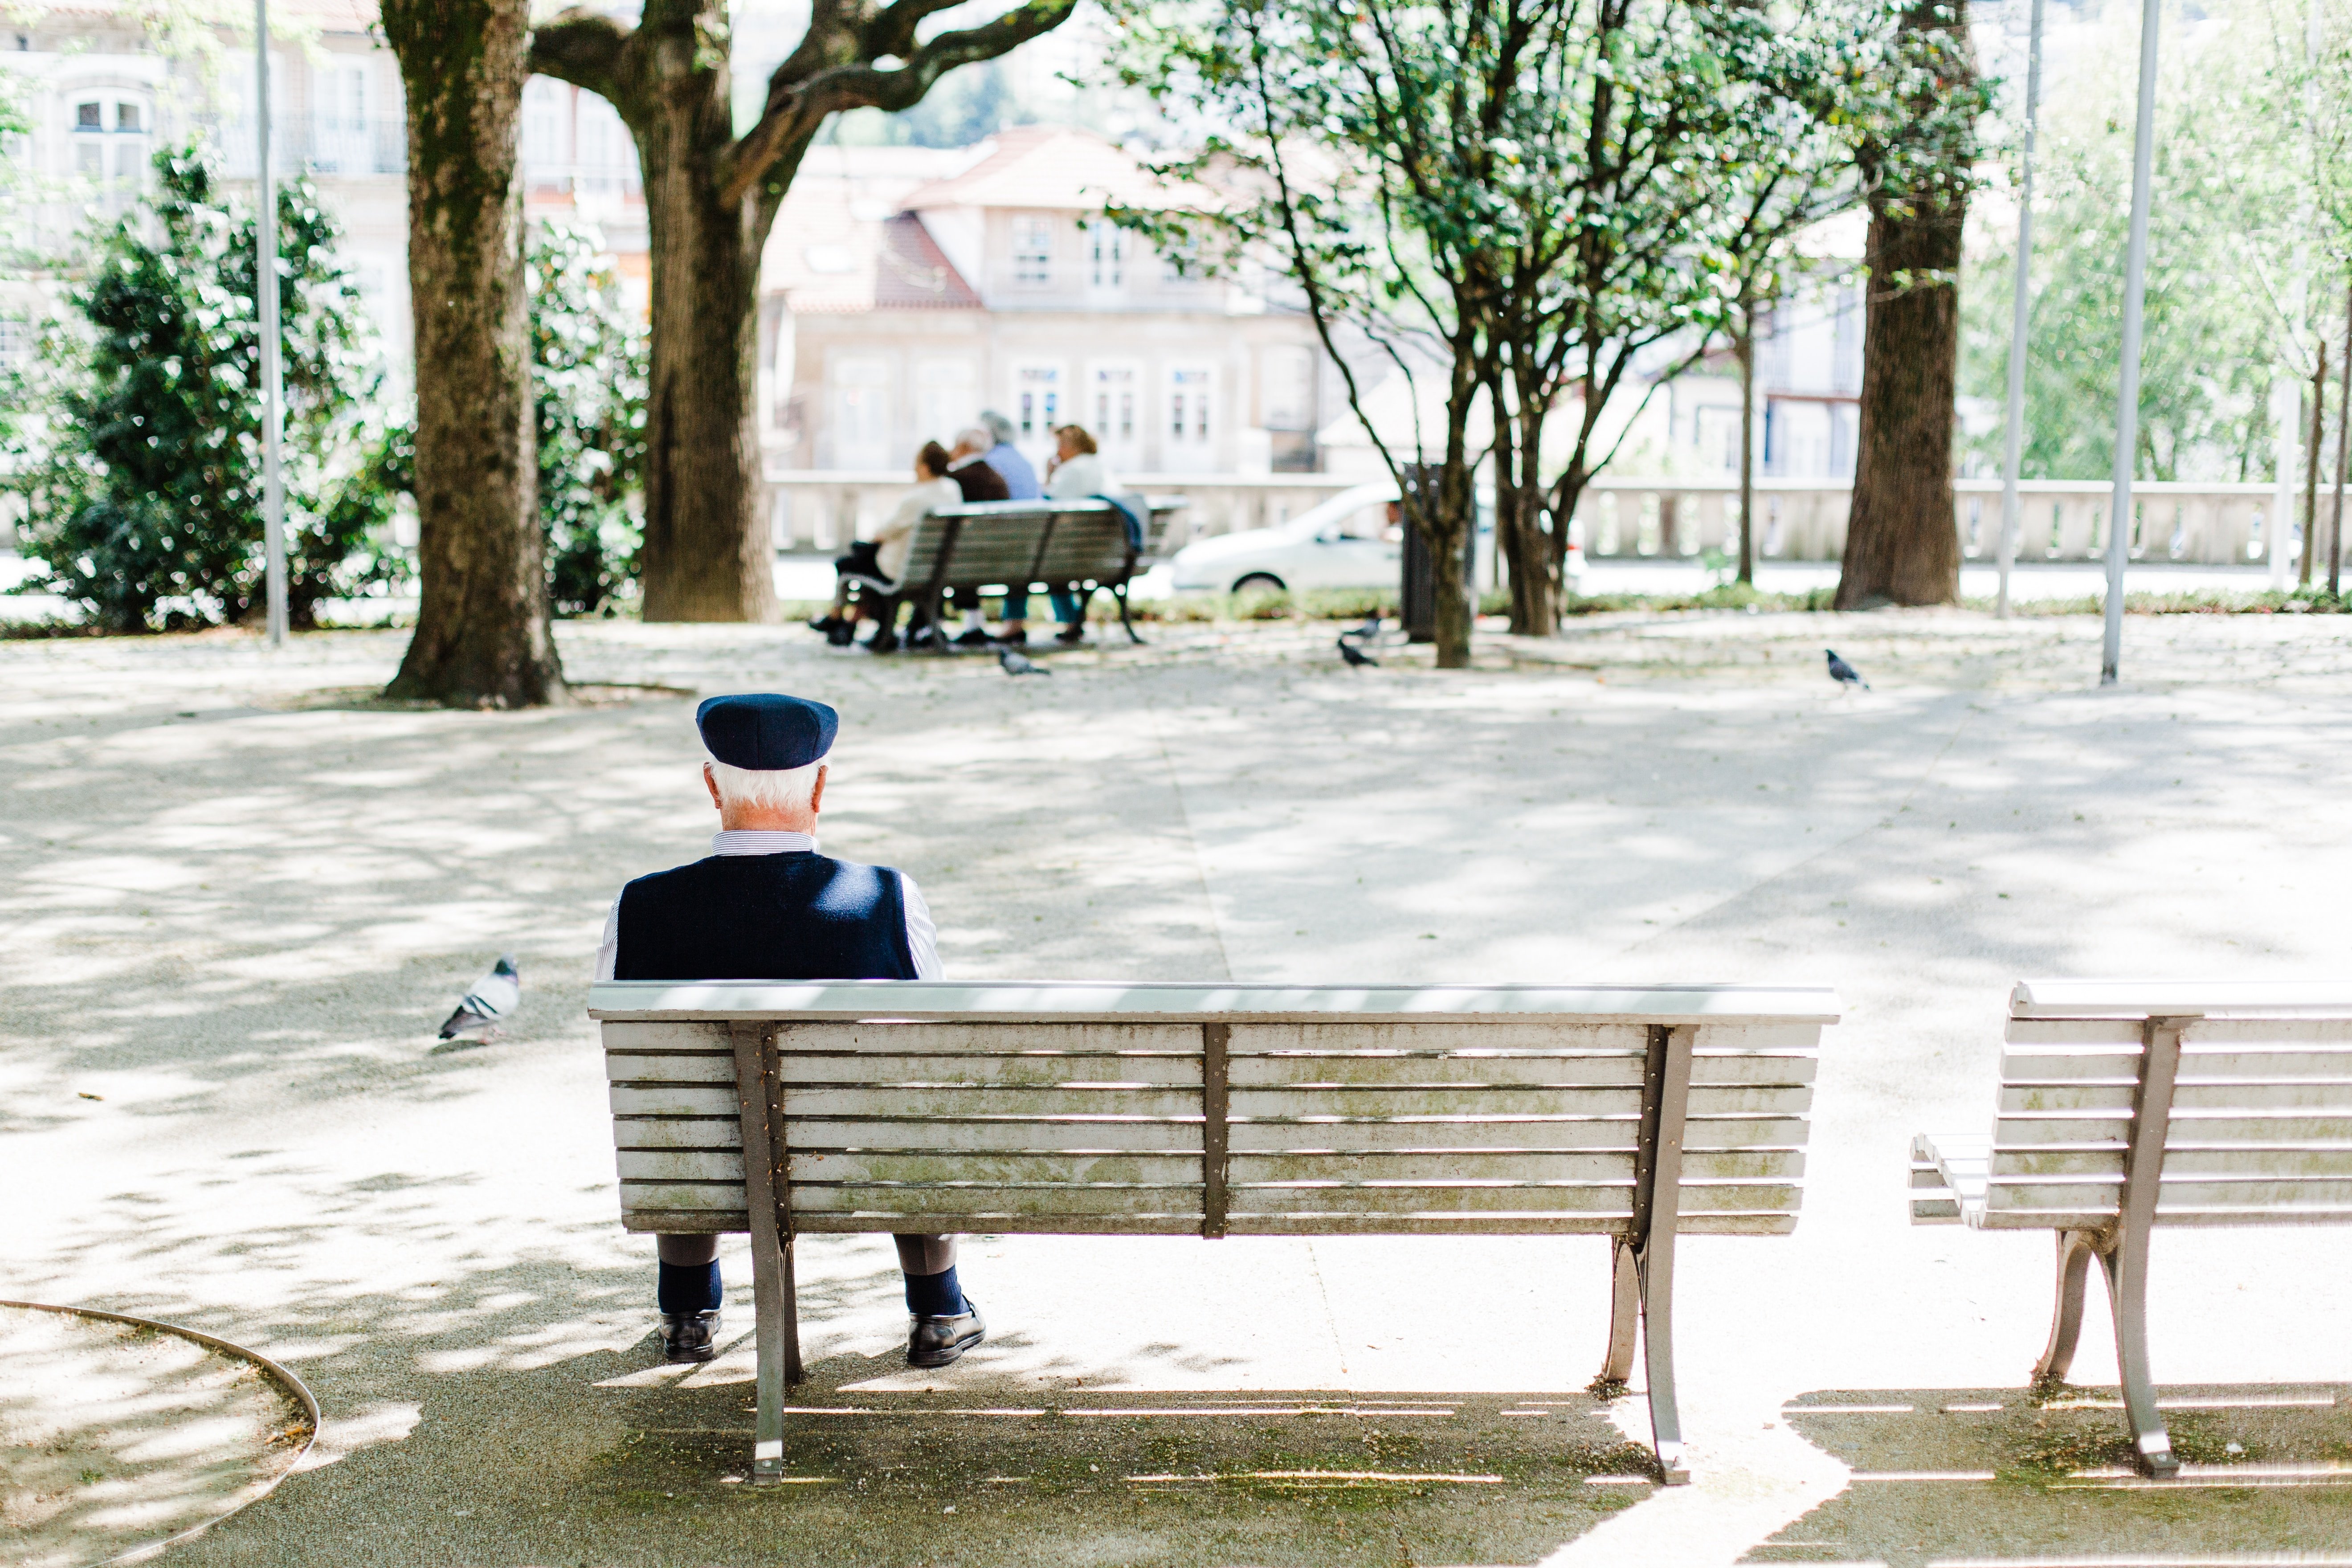 An old man sitting alone on a bench. | Source: Unsplash.com